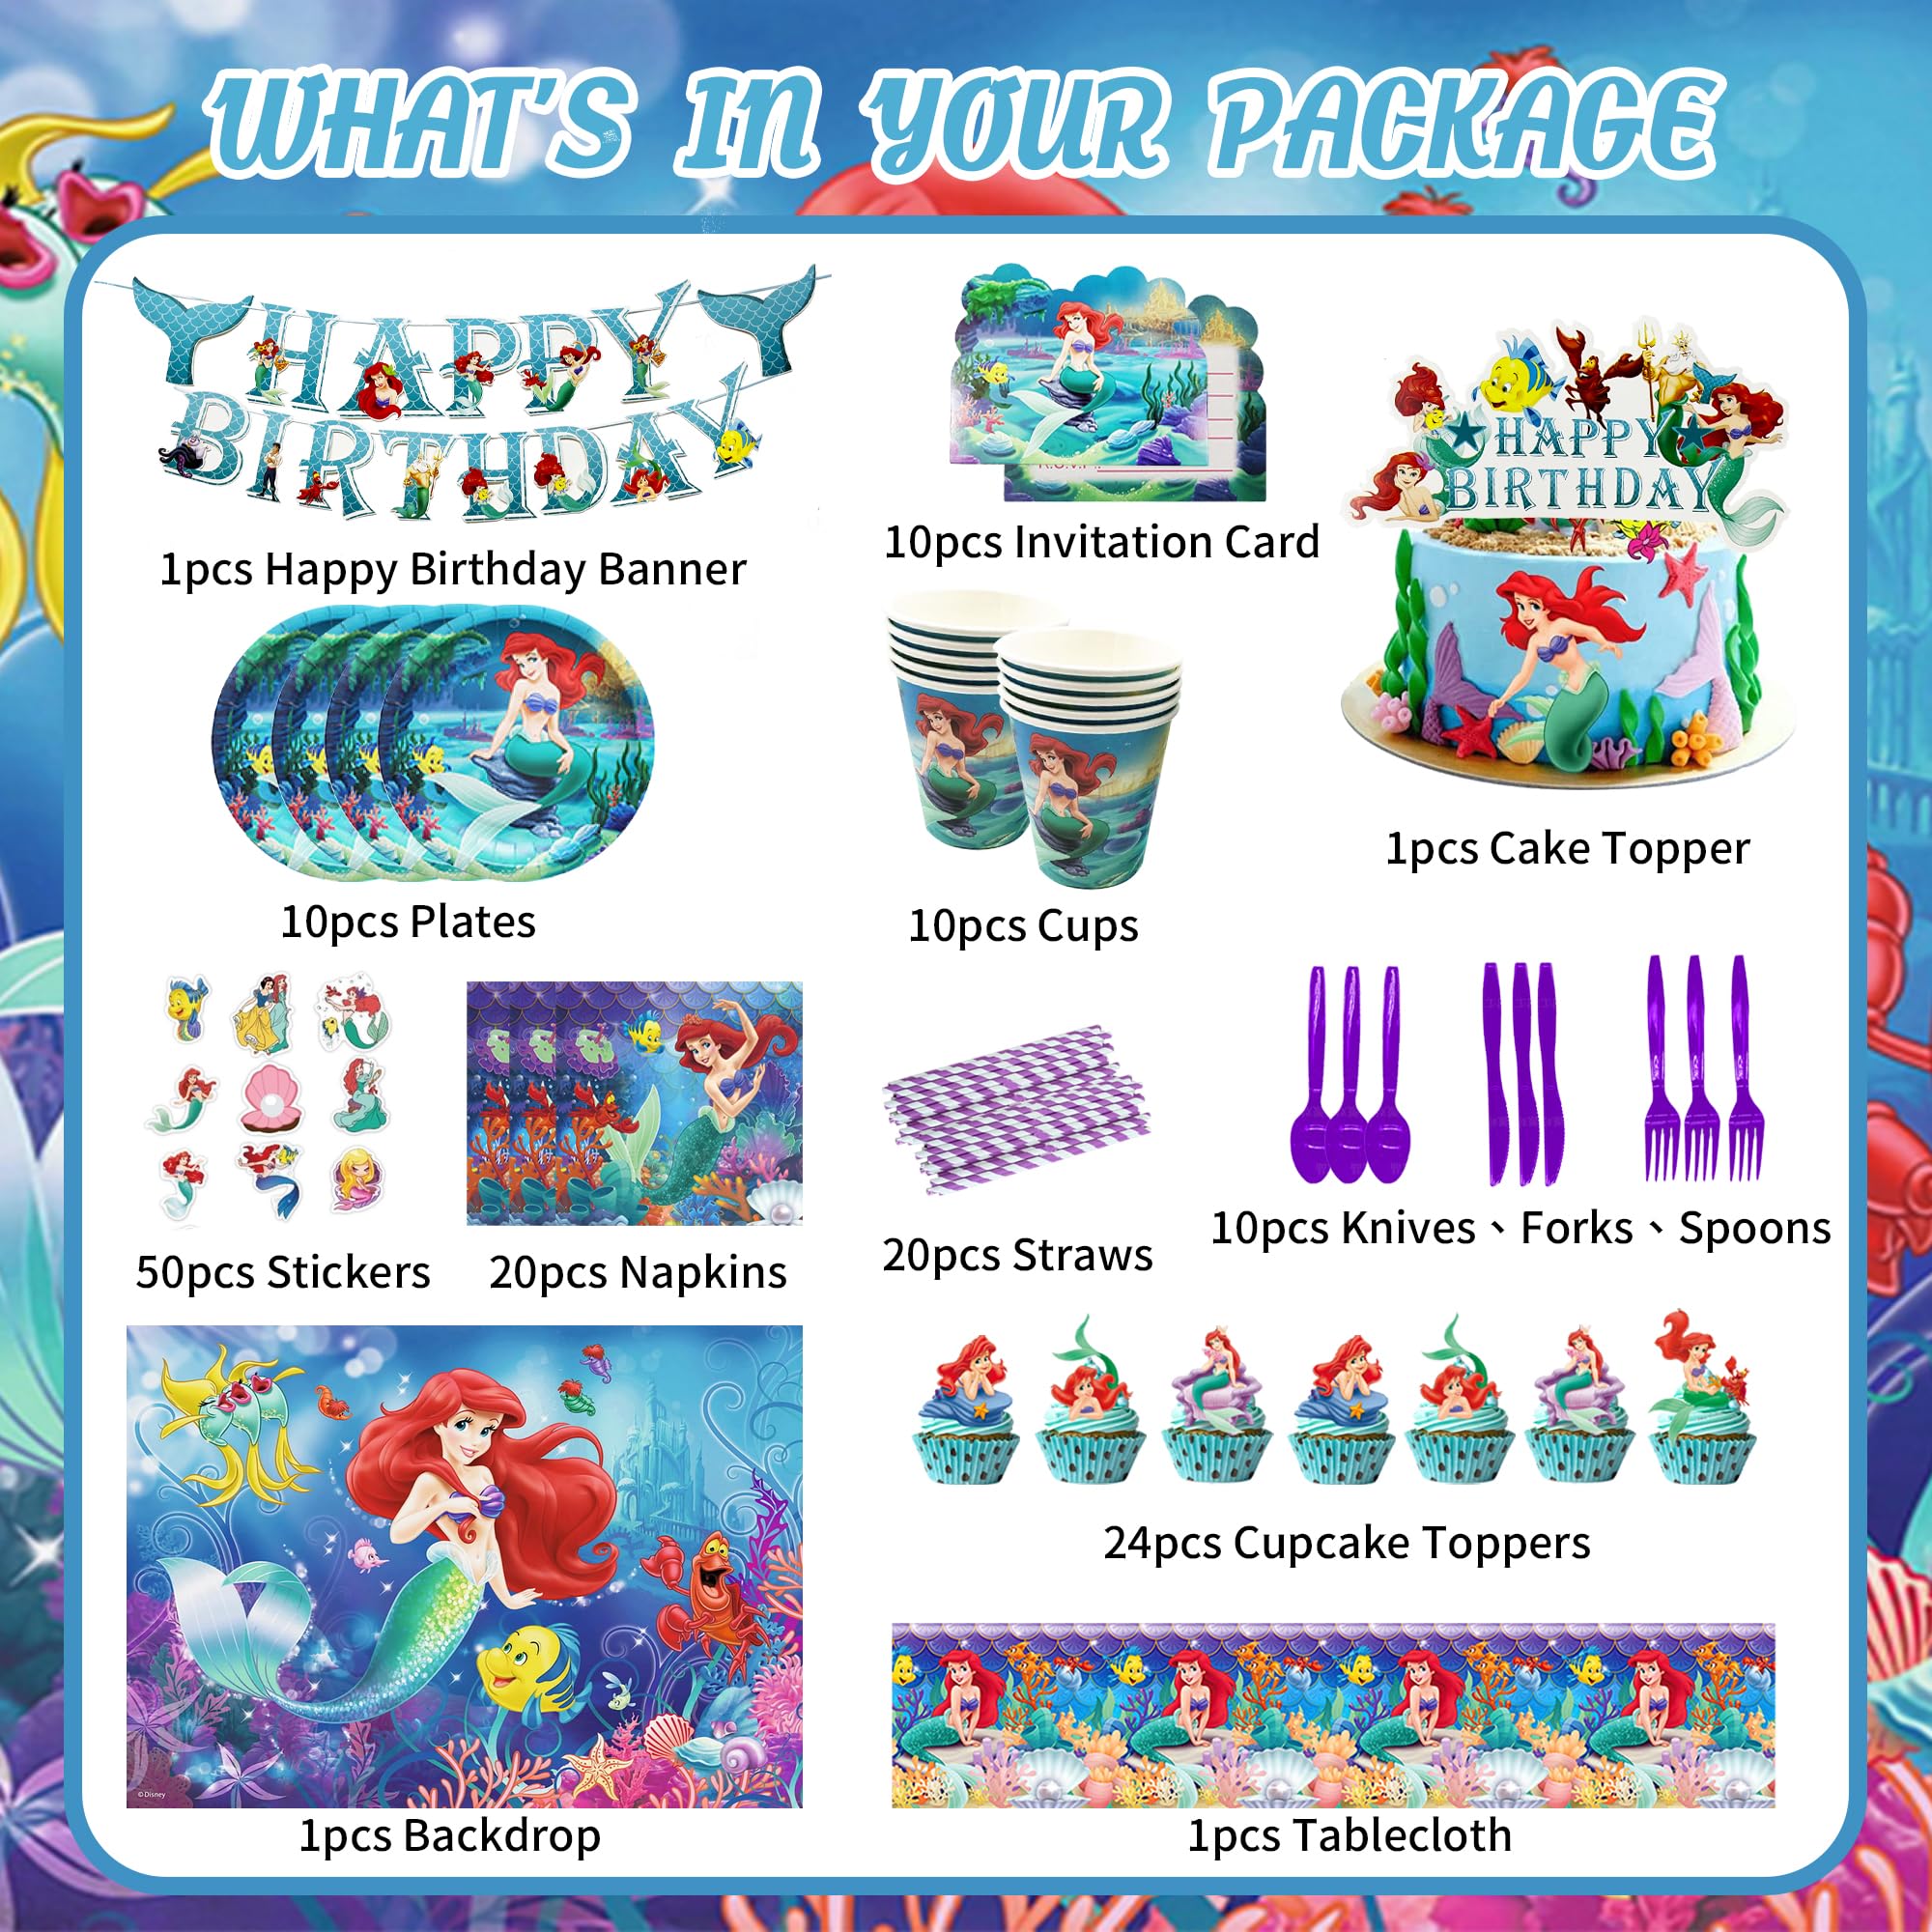 260 PCS Little Mermaid Birthday Party Supplies, Mermaid Birthday Party Decorations, Included Happy Birthday Banner, Cake & Cupcake Topper, Balloons, Invitation Cards,Backdrop, Tableware and Stickers